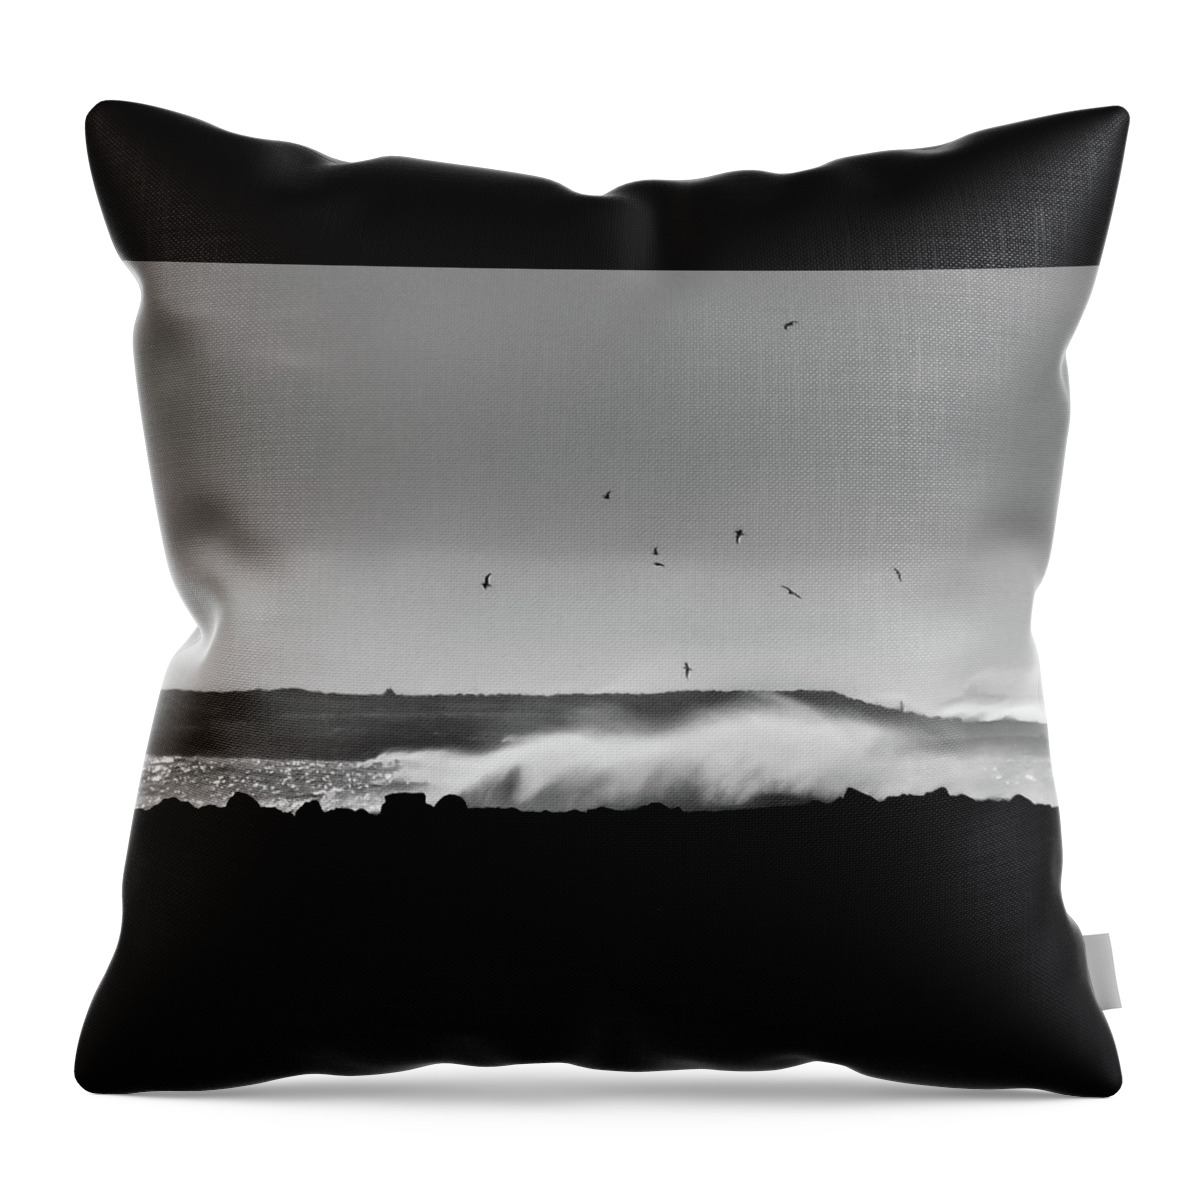 B & W Throw Pillow featuring the photograph Surf Birds by Geoff Smith